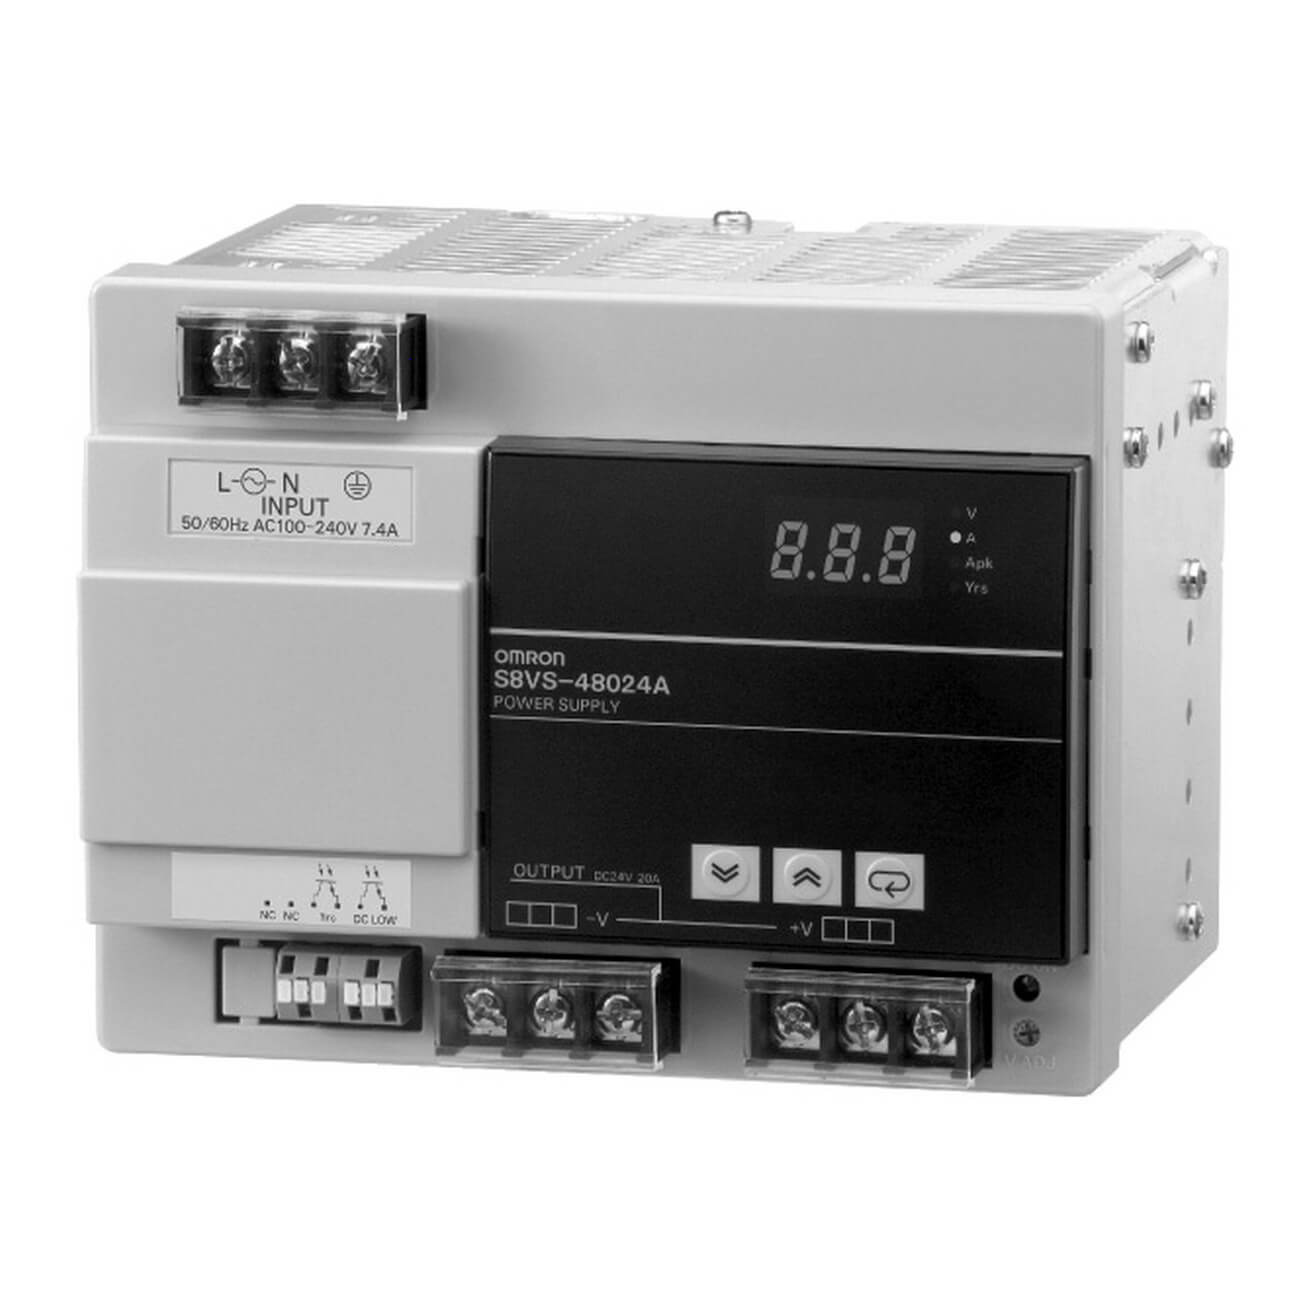 Details about   OMRON S8VS-48024A POWER SUPPLY FREE SHIP 